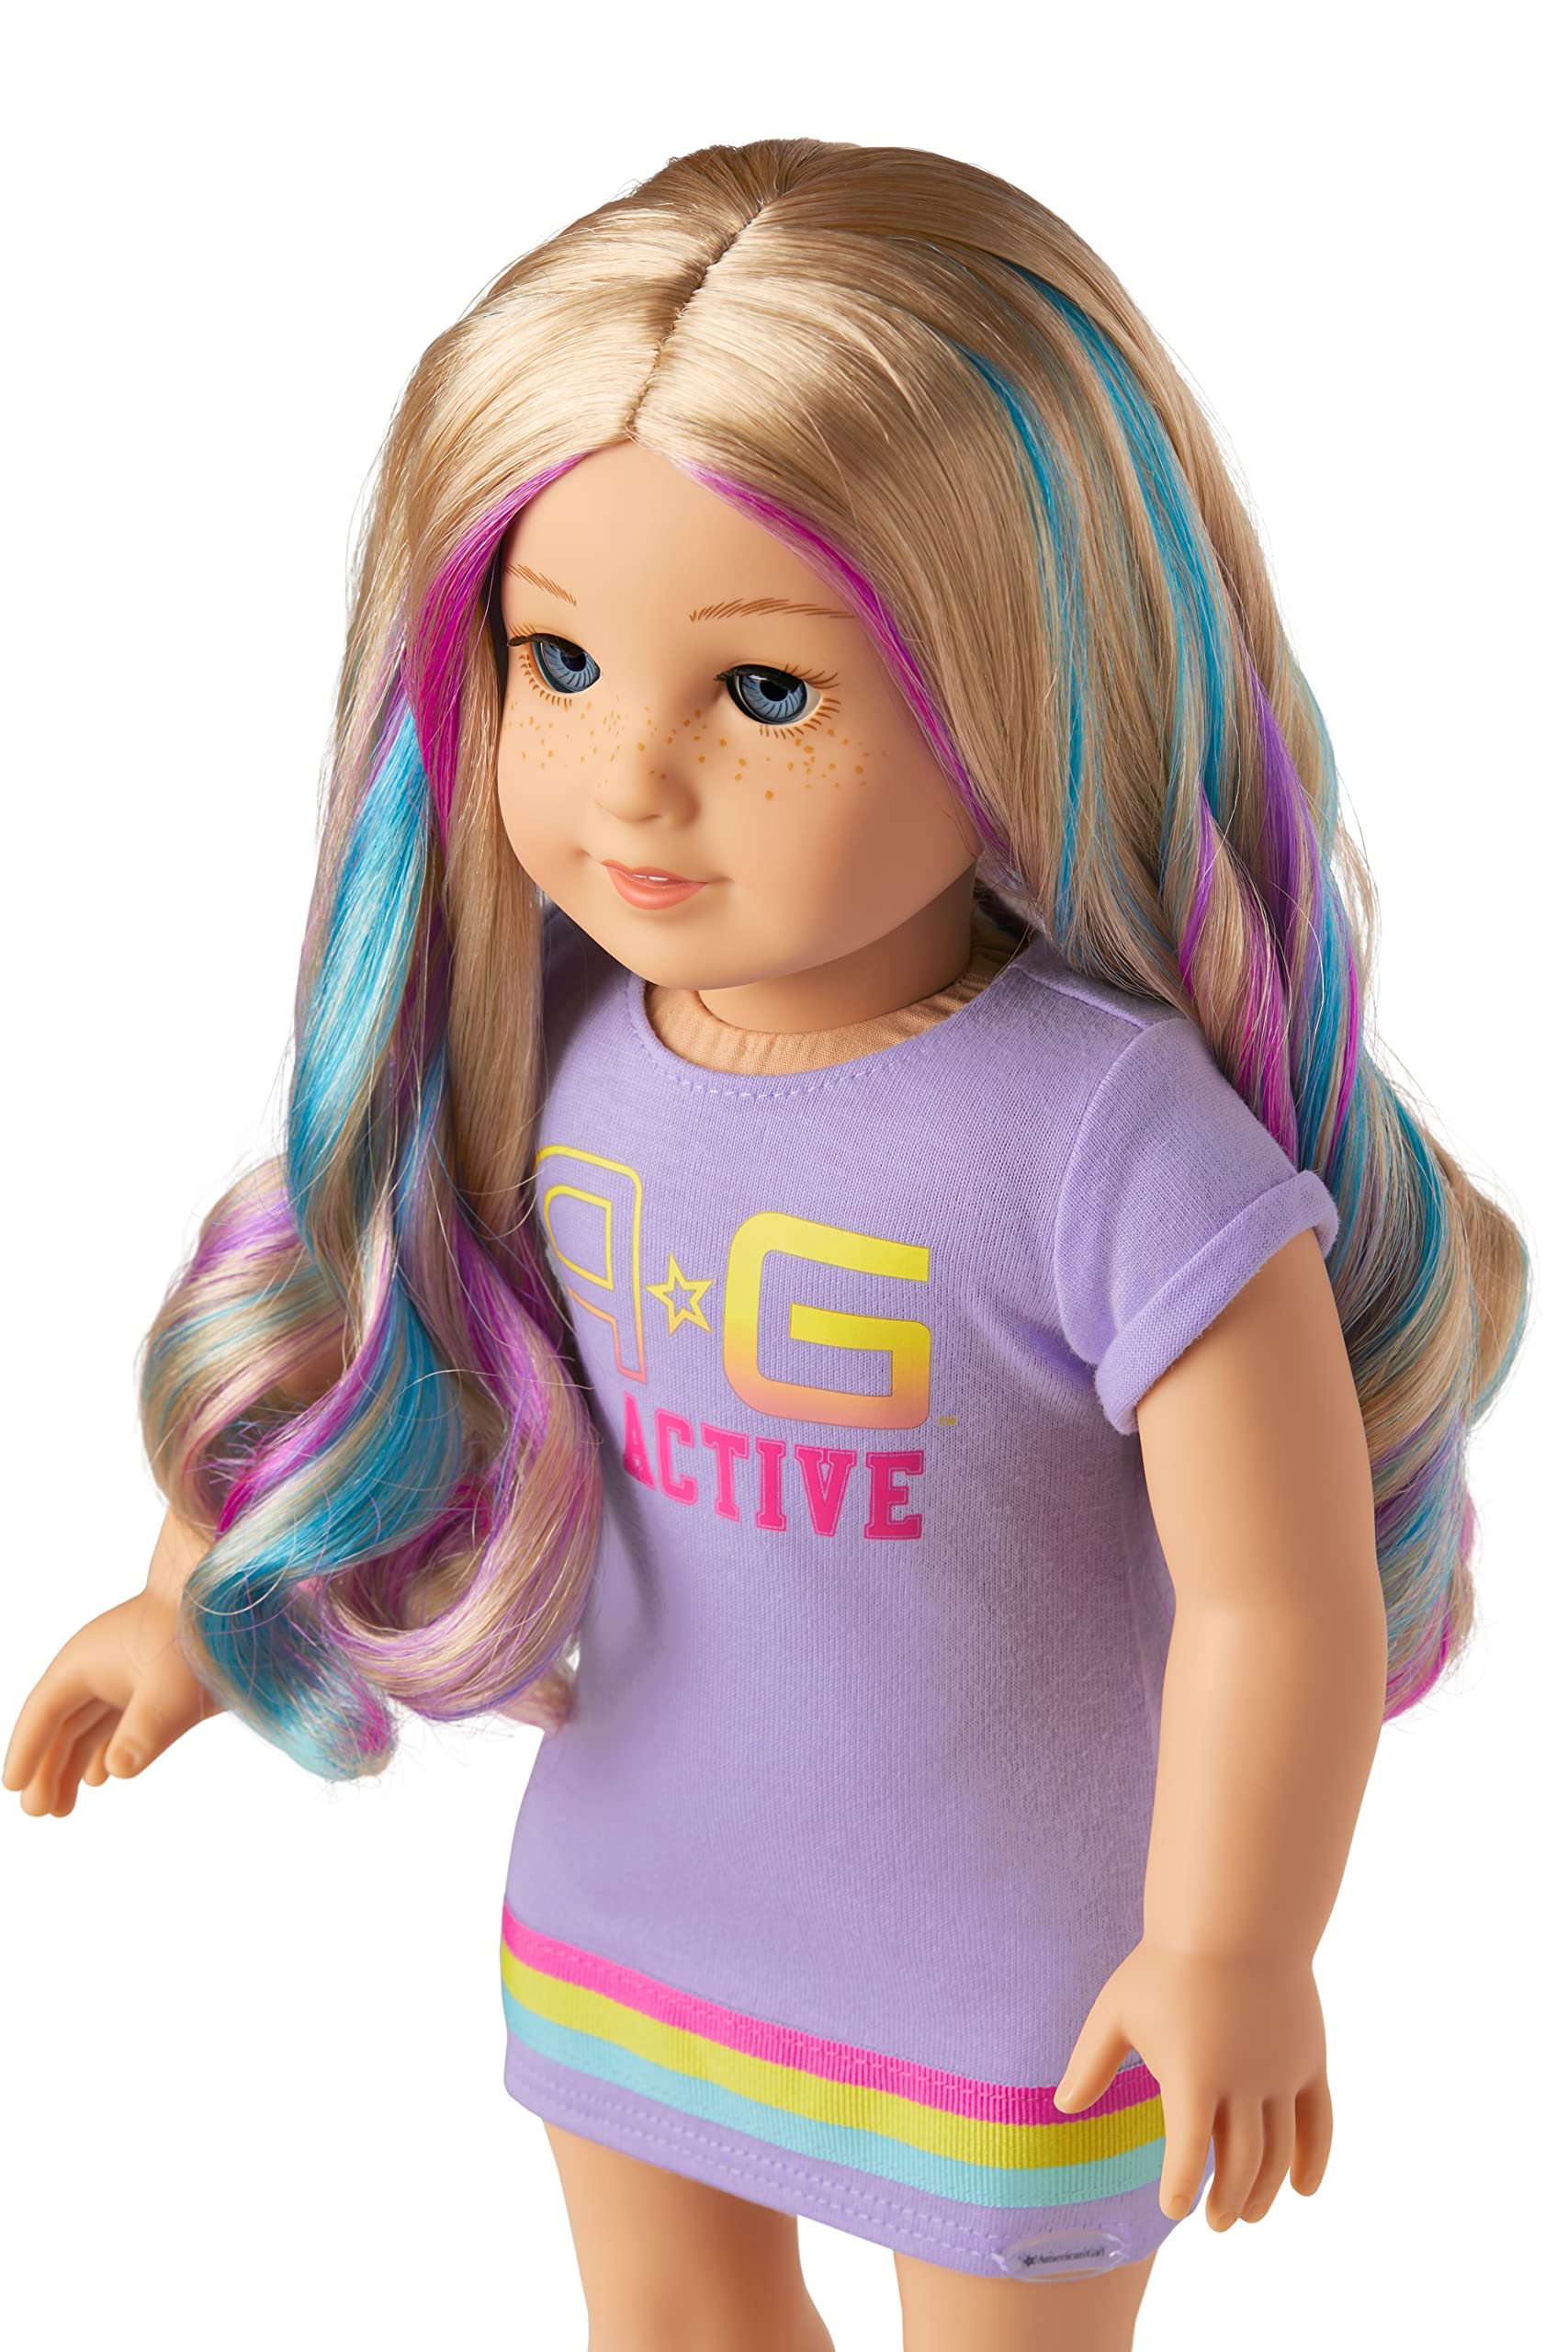 American Girl Truly Me 18-inch Doll #110 with Blue Eyes, Blonde Hair w/Highlights, Light Skin, T-shirt Dress, For Ages 6+